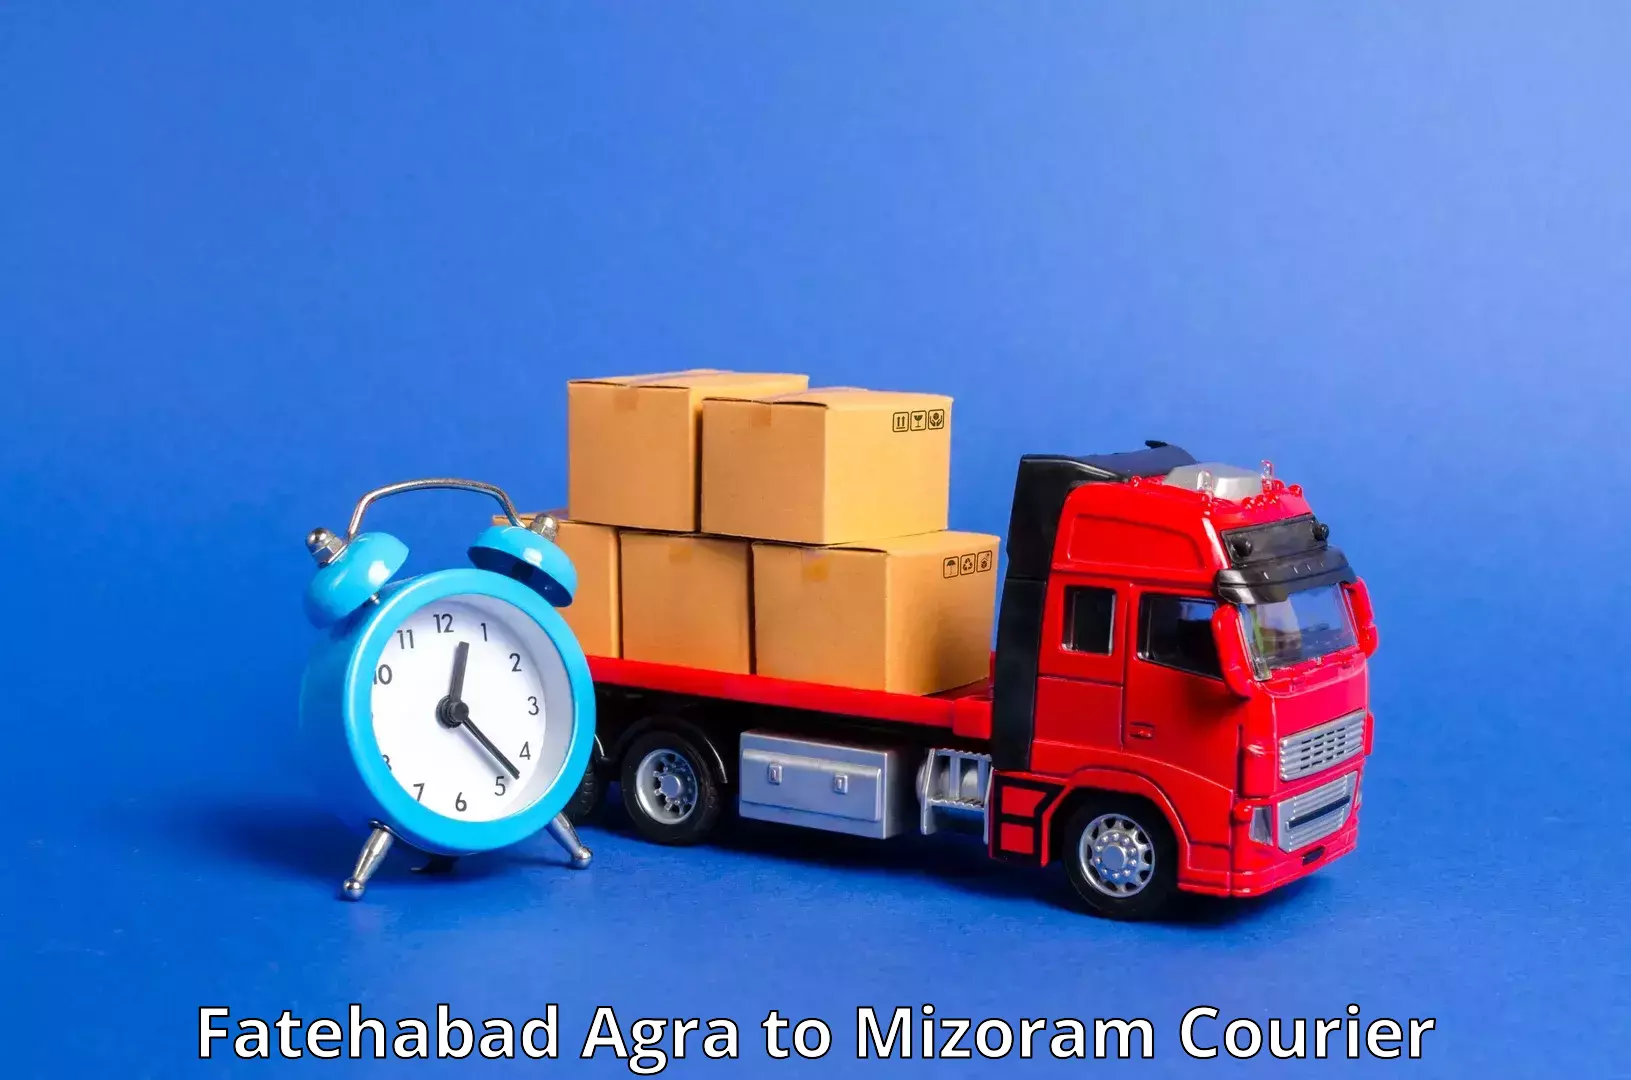 Courier service partnerships Fatehabad Agra to Lawngtlai